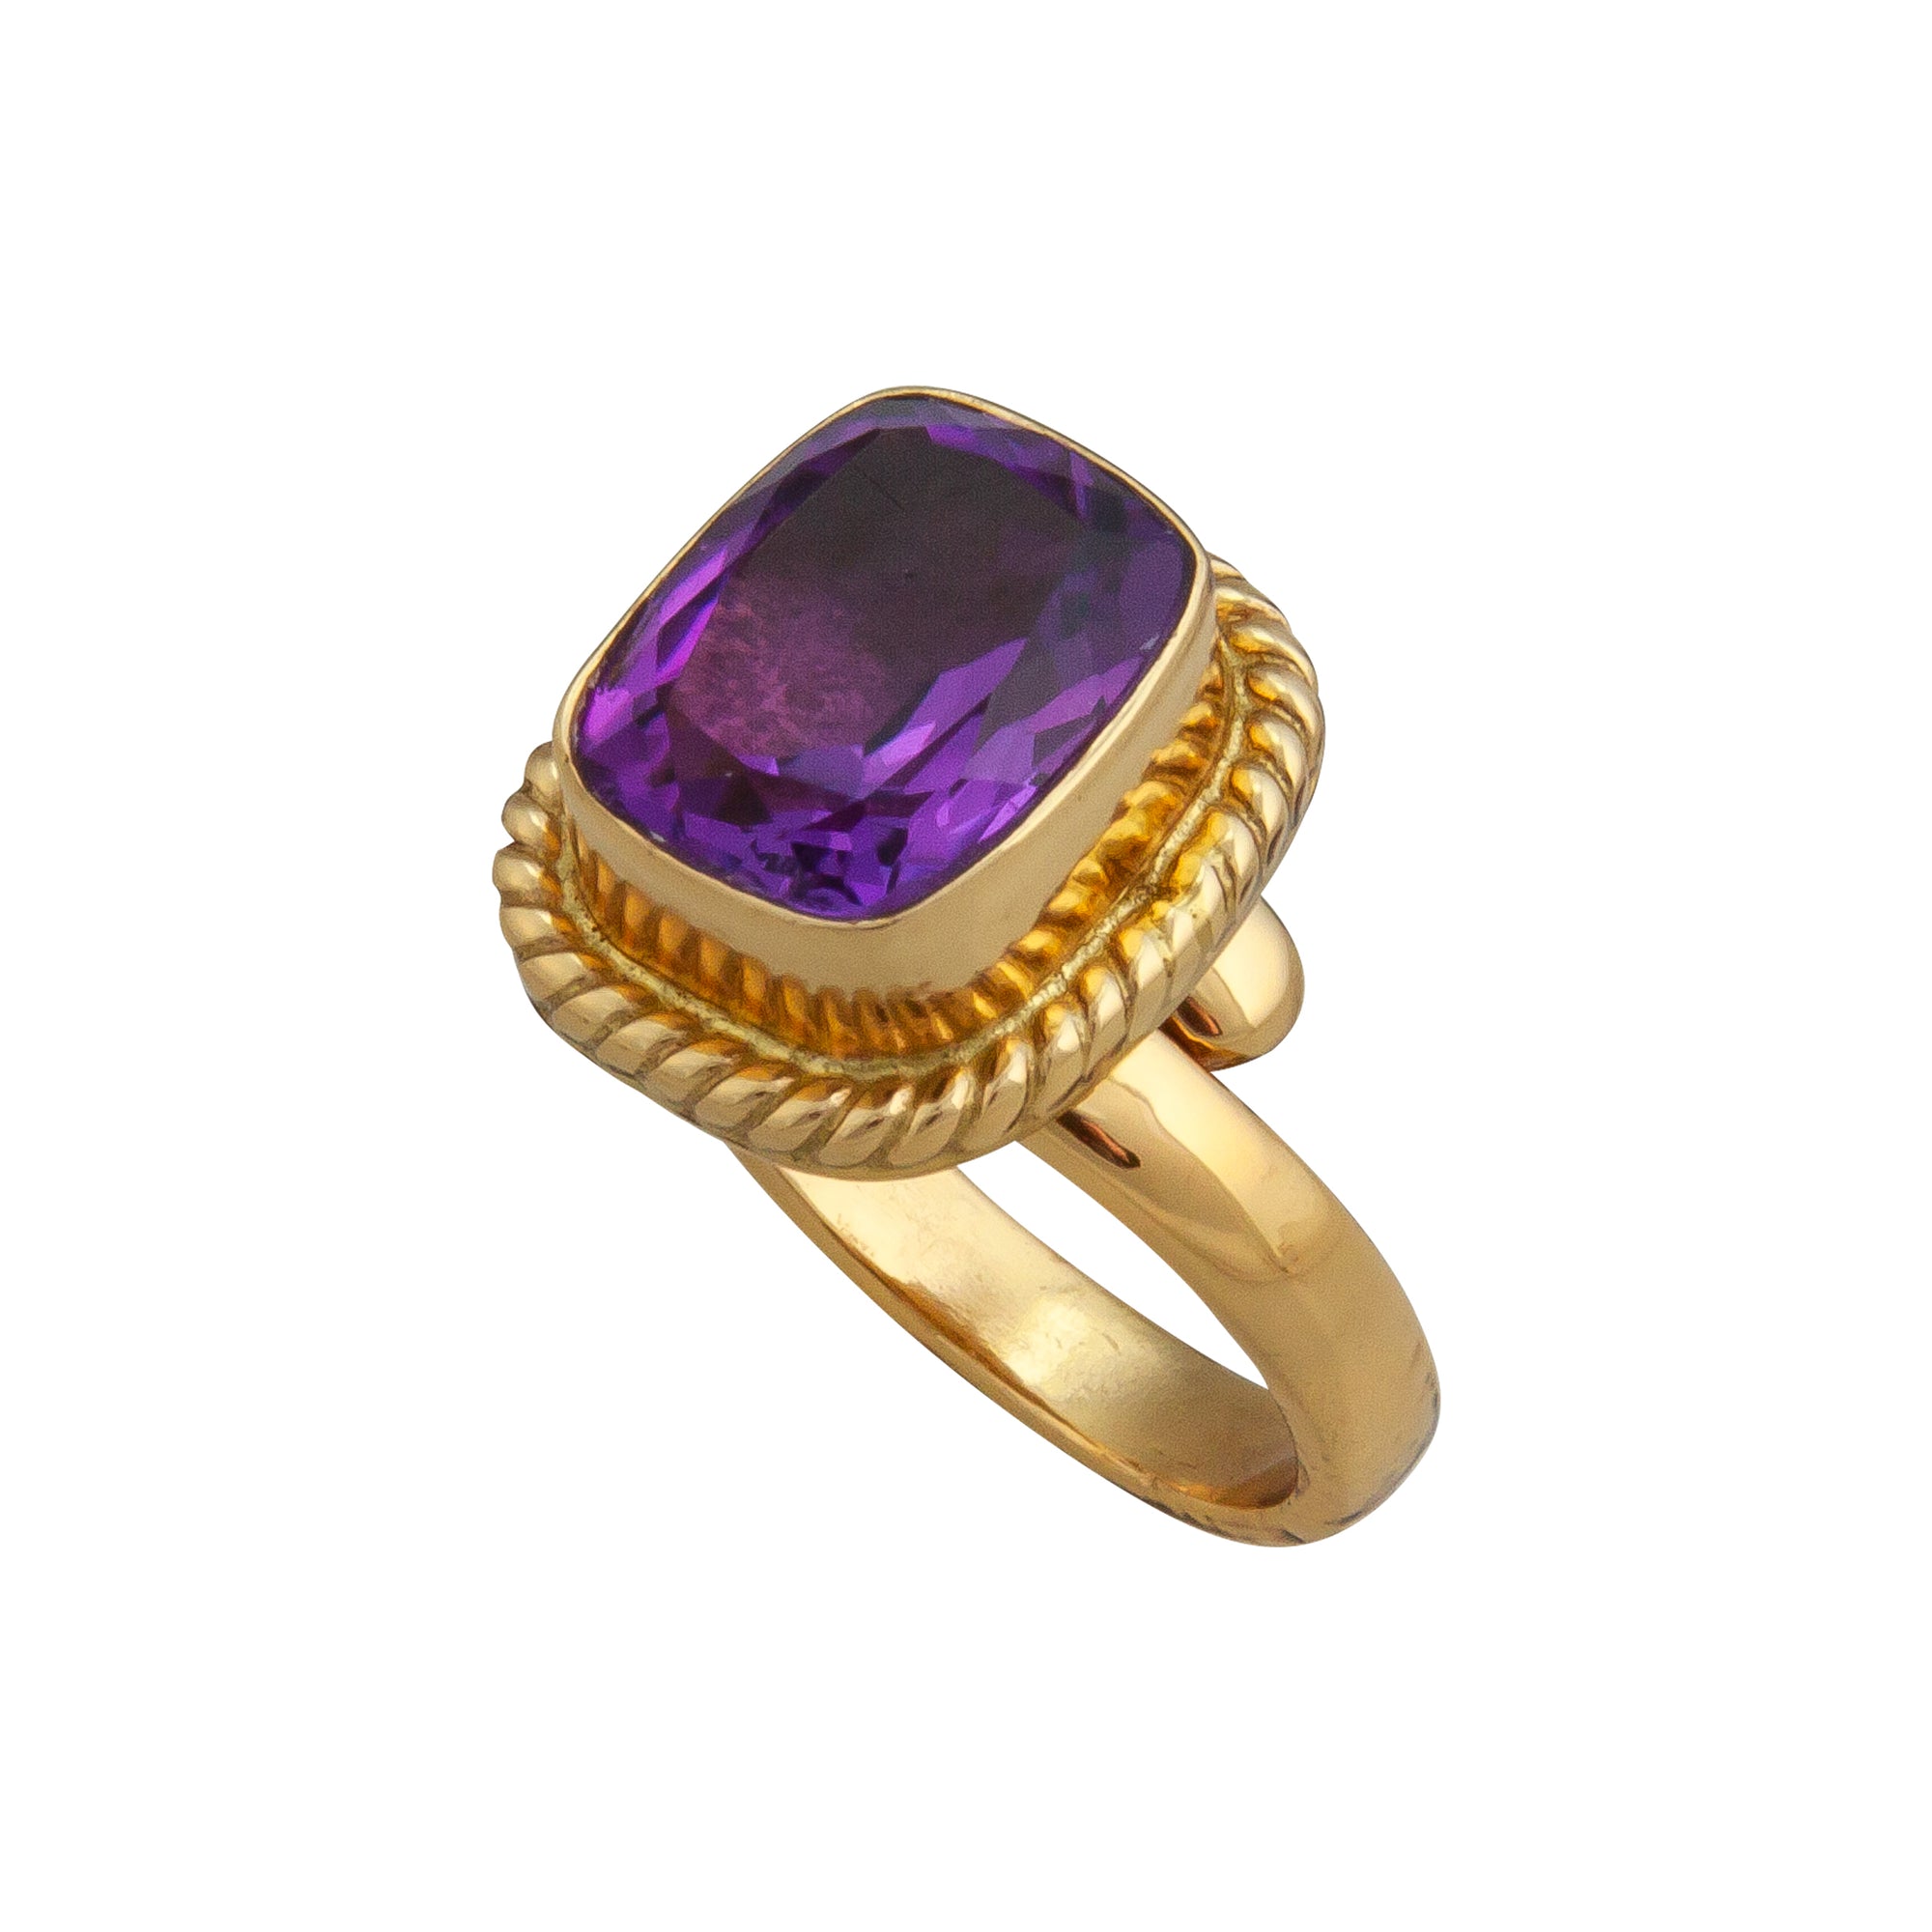 Charles Albert Jewelry - Alchemia Amethyst Adjustable Rope Ring - Side View